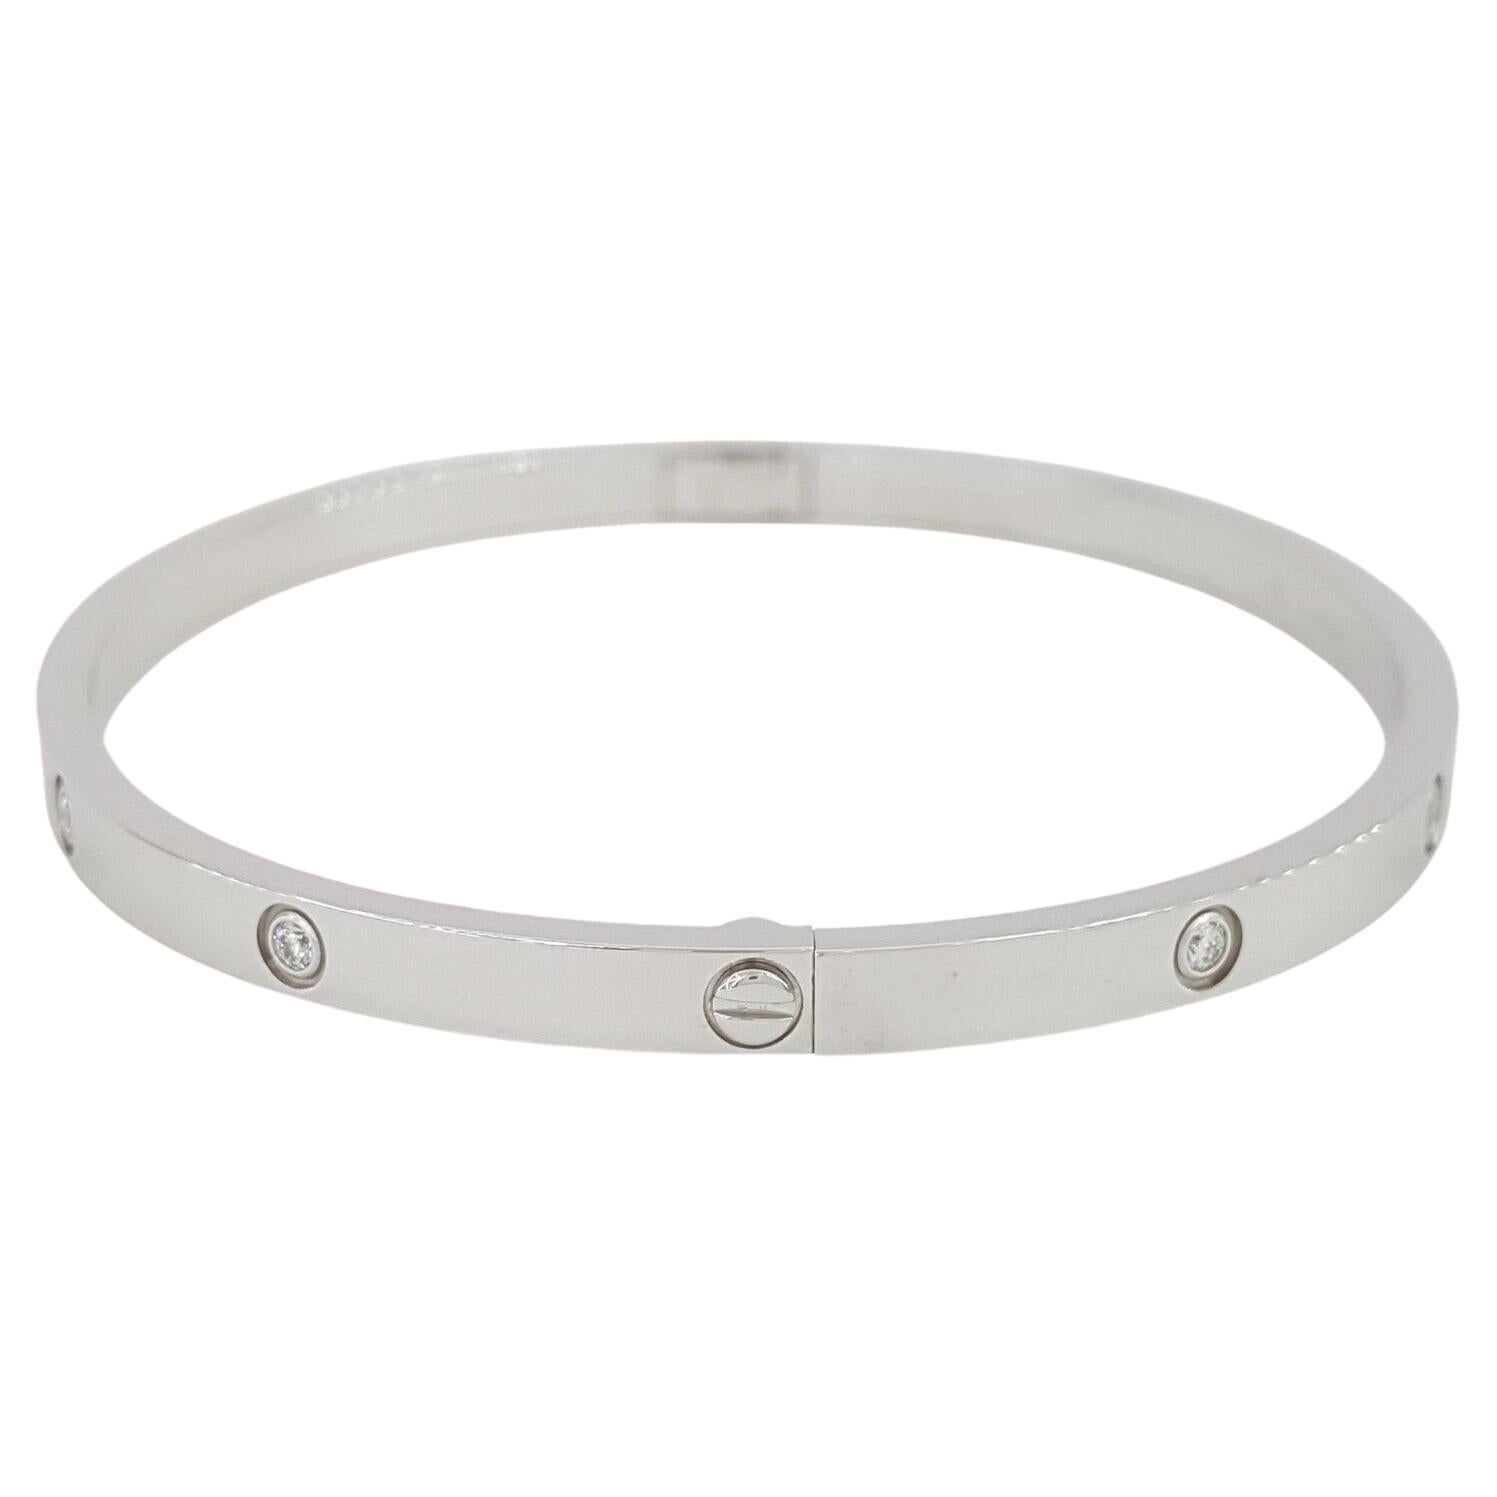 Cartier Love Small 18K White Gold 0.21 ct Round Brilliant Cut 10 Diamond Bracelet 3.7mm Wide Size 18.



The Bracelet weighs 21.4 grams of solid 18K White Gold, 3.7 mm wide, Size 18, 59.5x50mm inner Diameter, there are 10 natural round diamonds